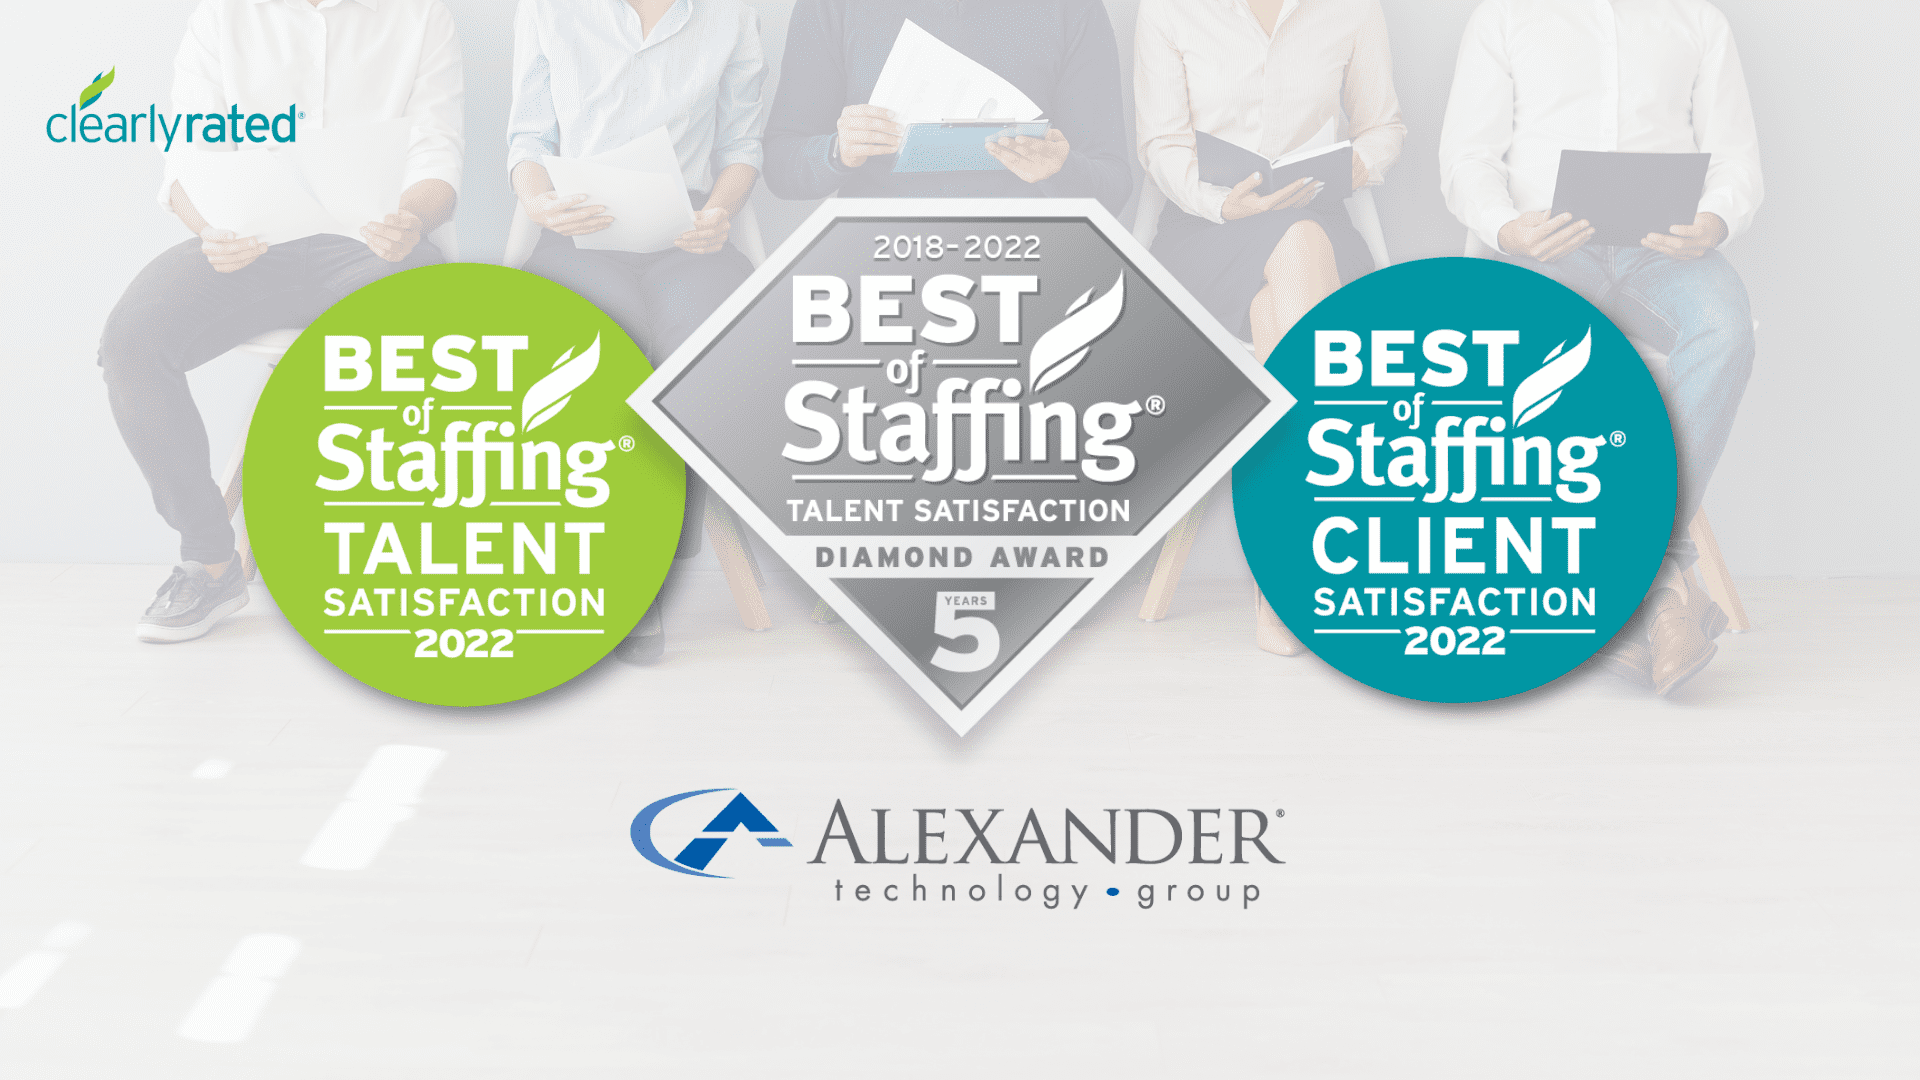 Alexander Technology Group Wins Clearlyrated’S 2022 Best Of Staffing Talent – 5 Year Diamond Award For Service Excellence